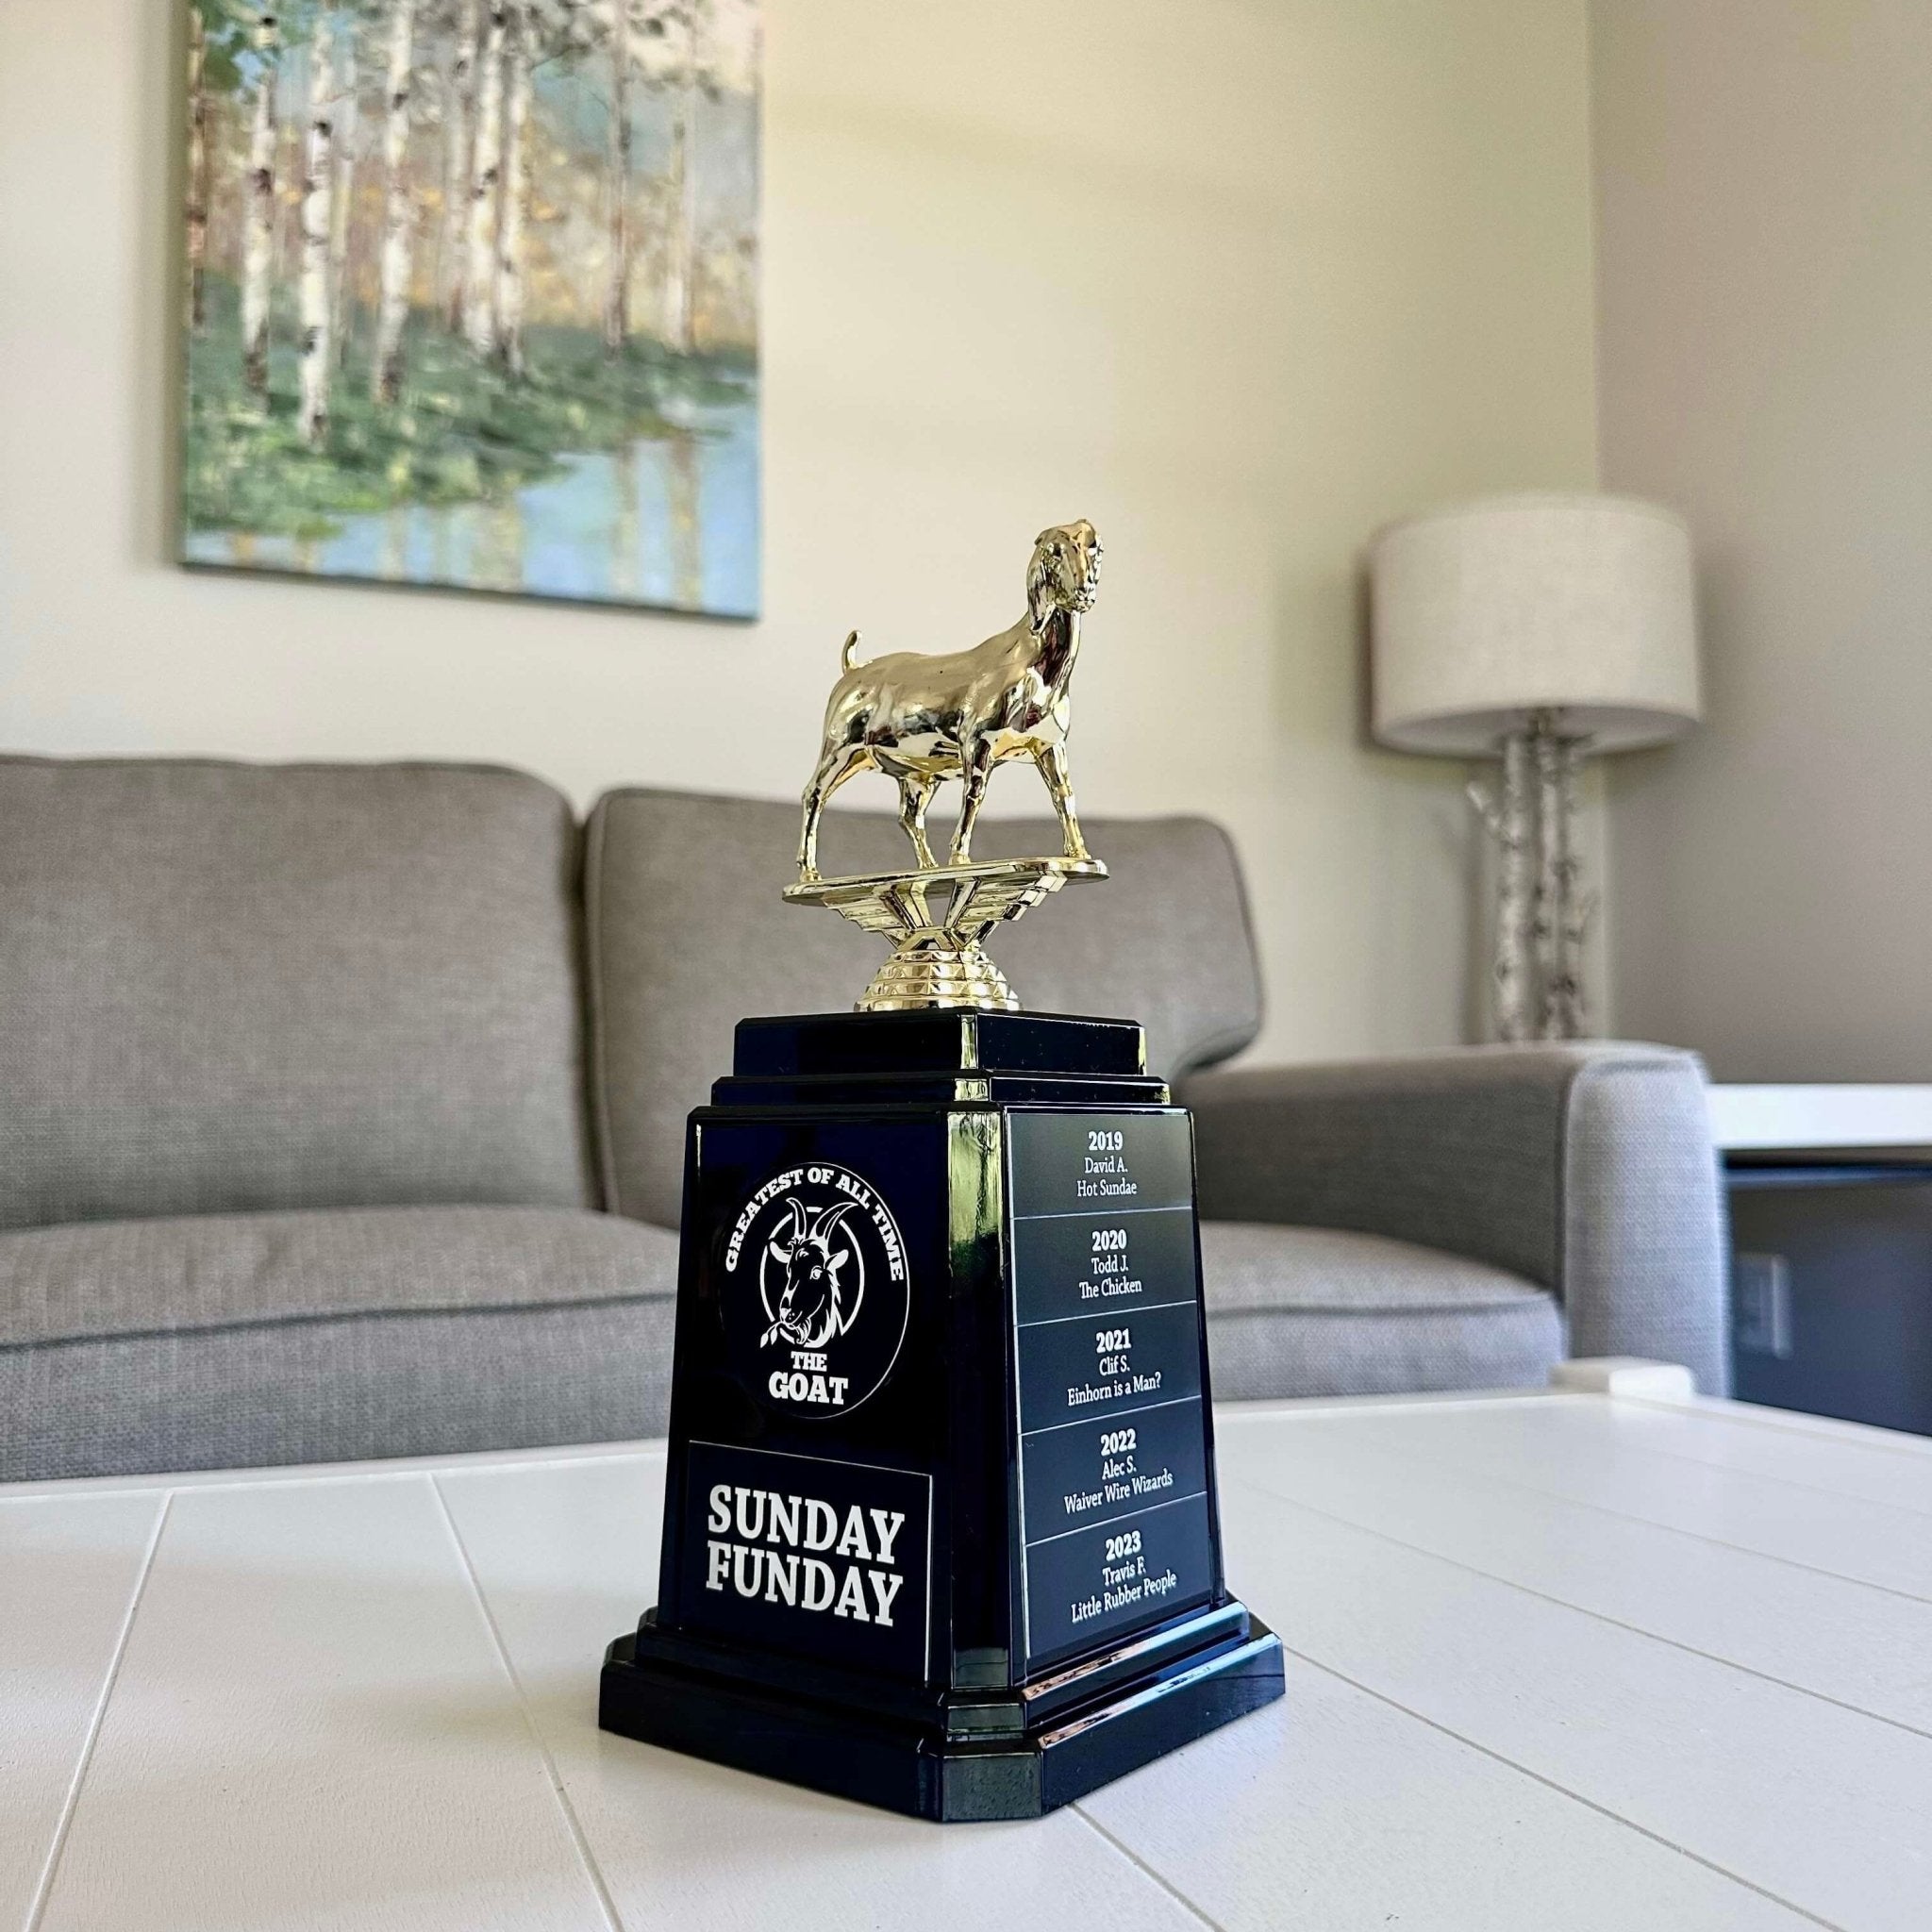 The GOAT Perpetual Trophy